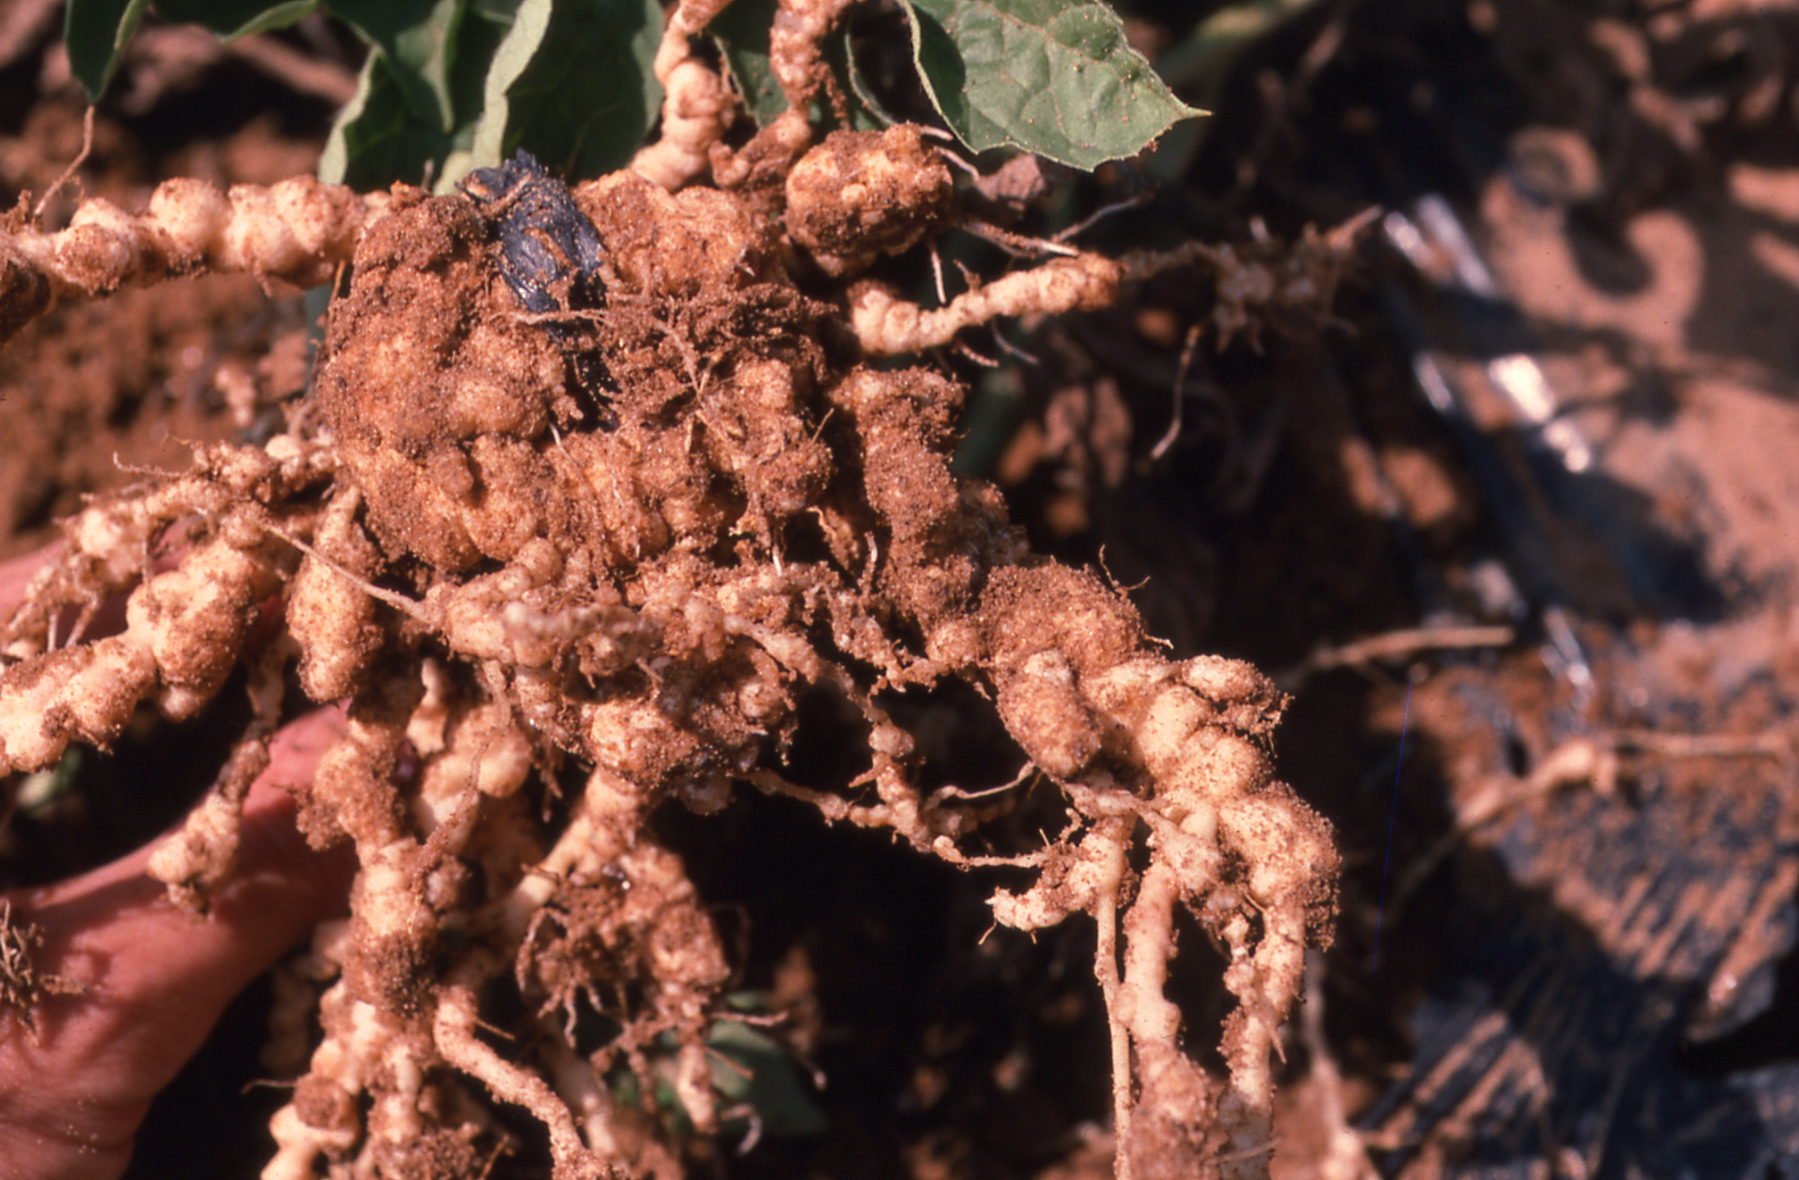 Figure 1. Roots of watermelon with galls due to root knot nematode.